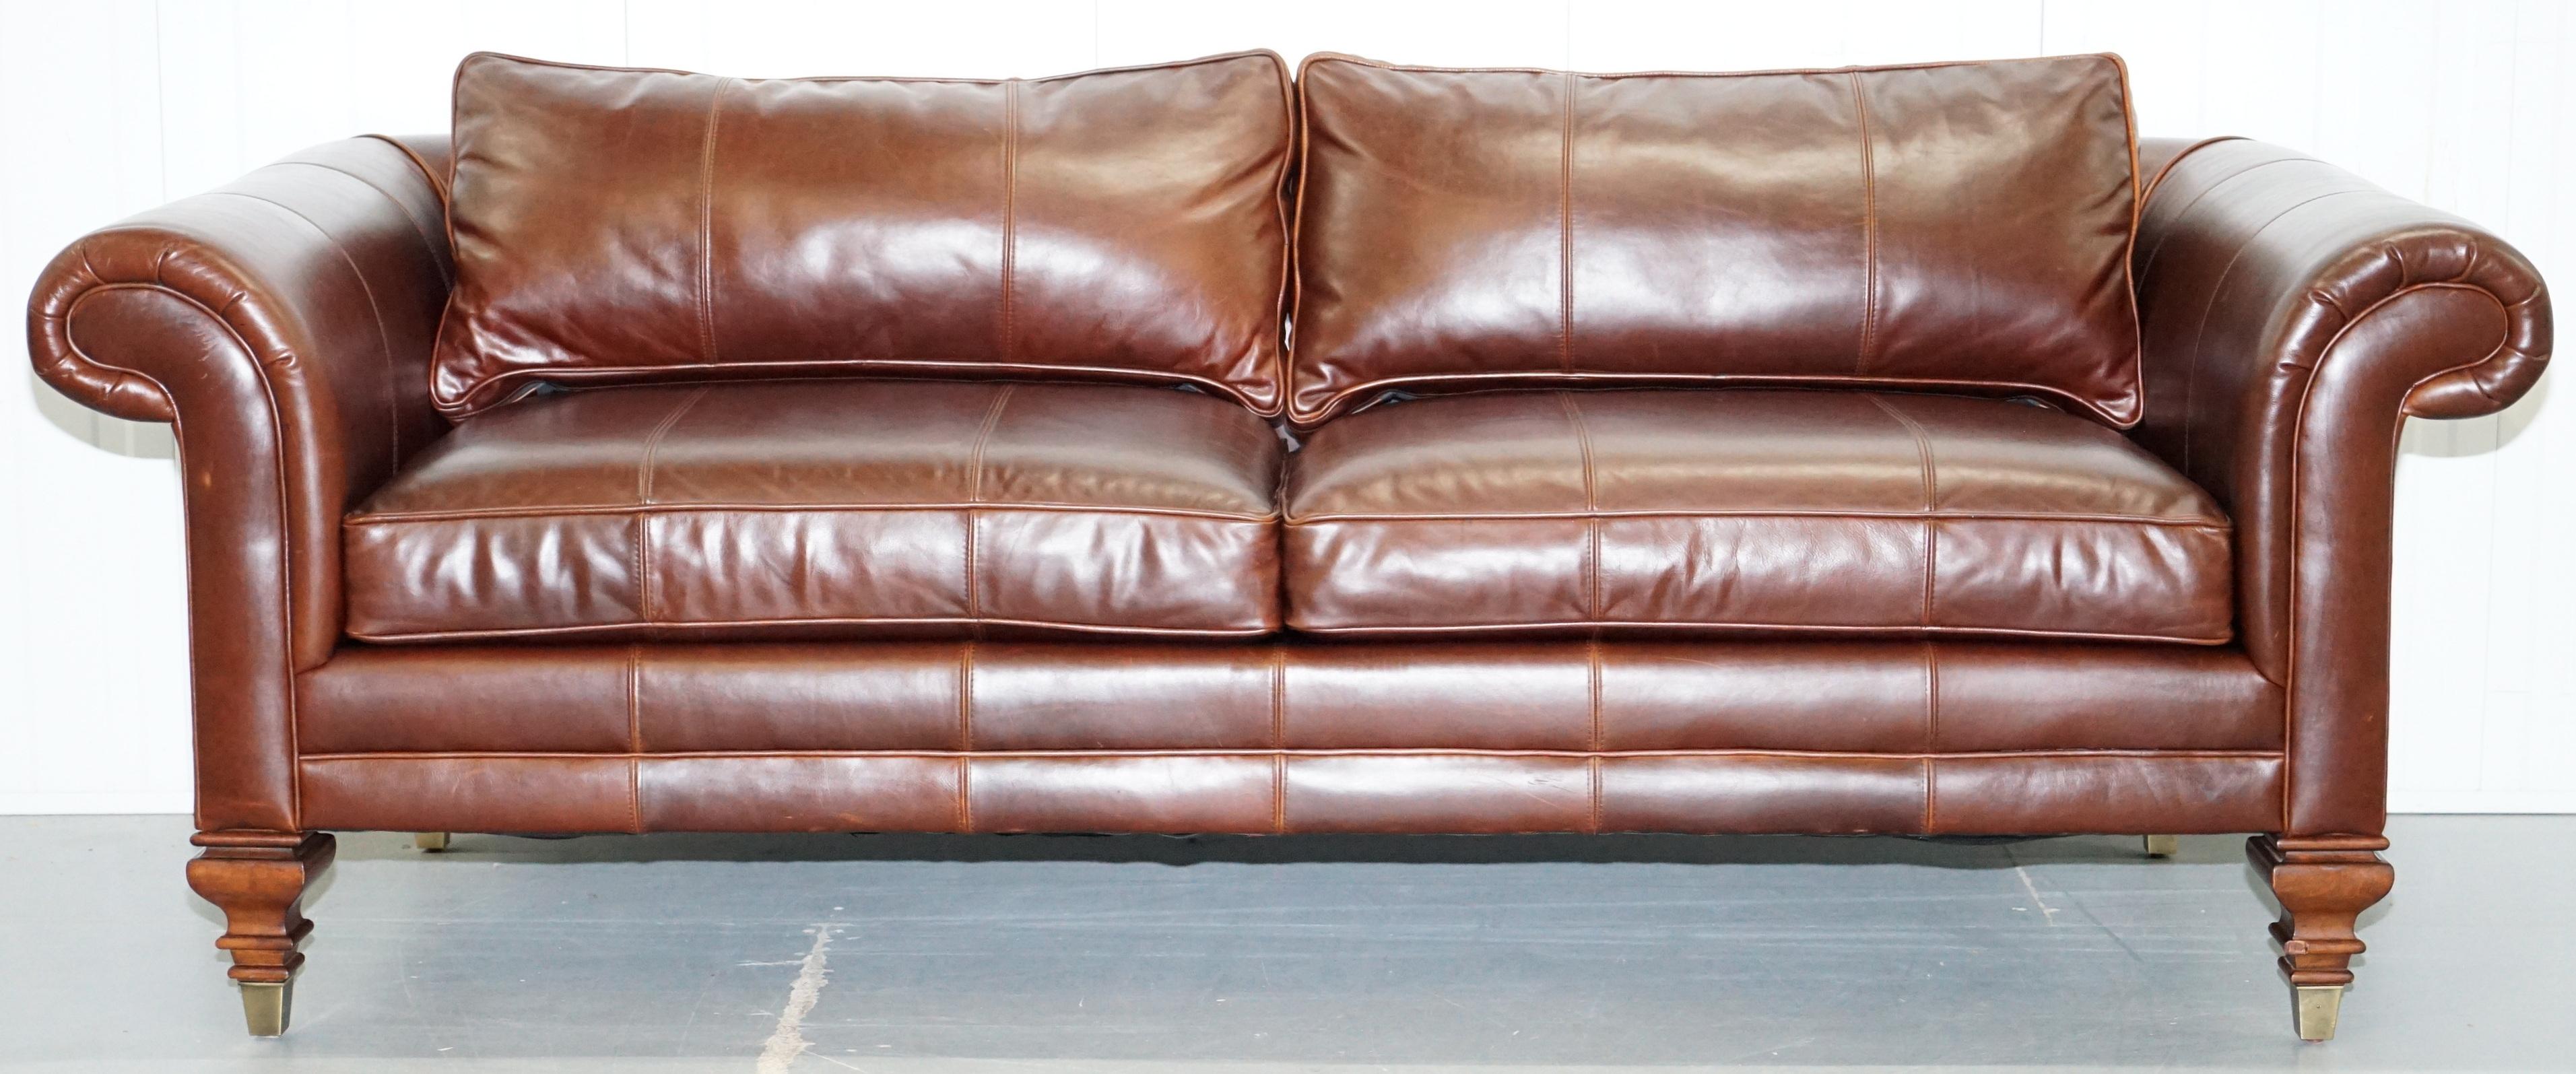 We are delighted to offer for sale this stunning Ralph Lauren Colonial thick brown leather three seater sofa RRP £16,000

Please note the delivery fee listed is just a guide, it covers within the M25 only

This sofa is just about as grand and